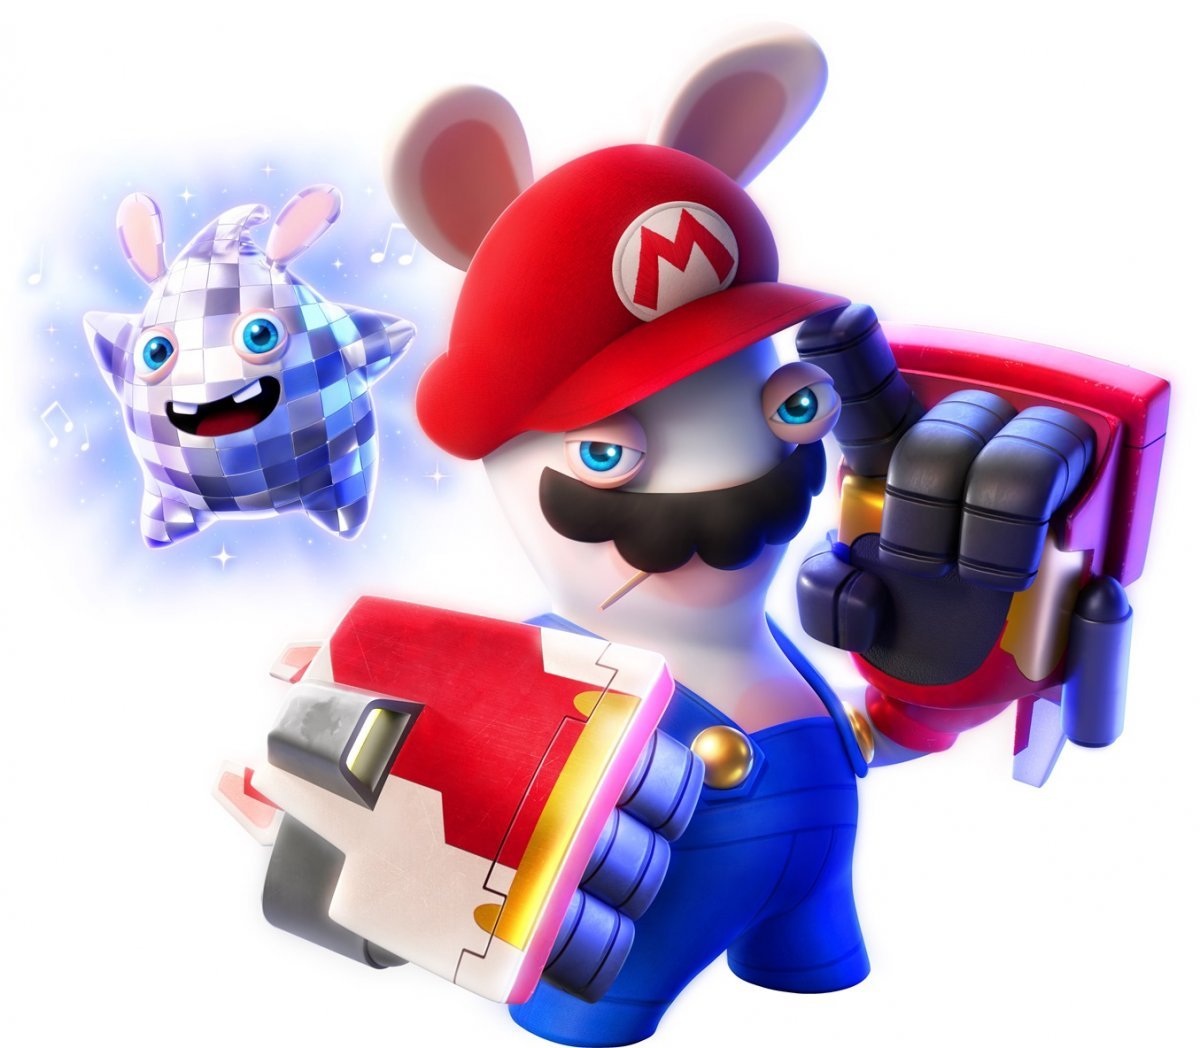 Mario + Rabbids Sparks of Hope, try the exclusive space for Nintendo Switch